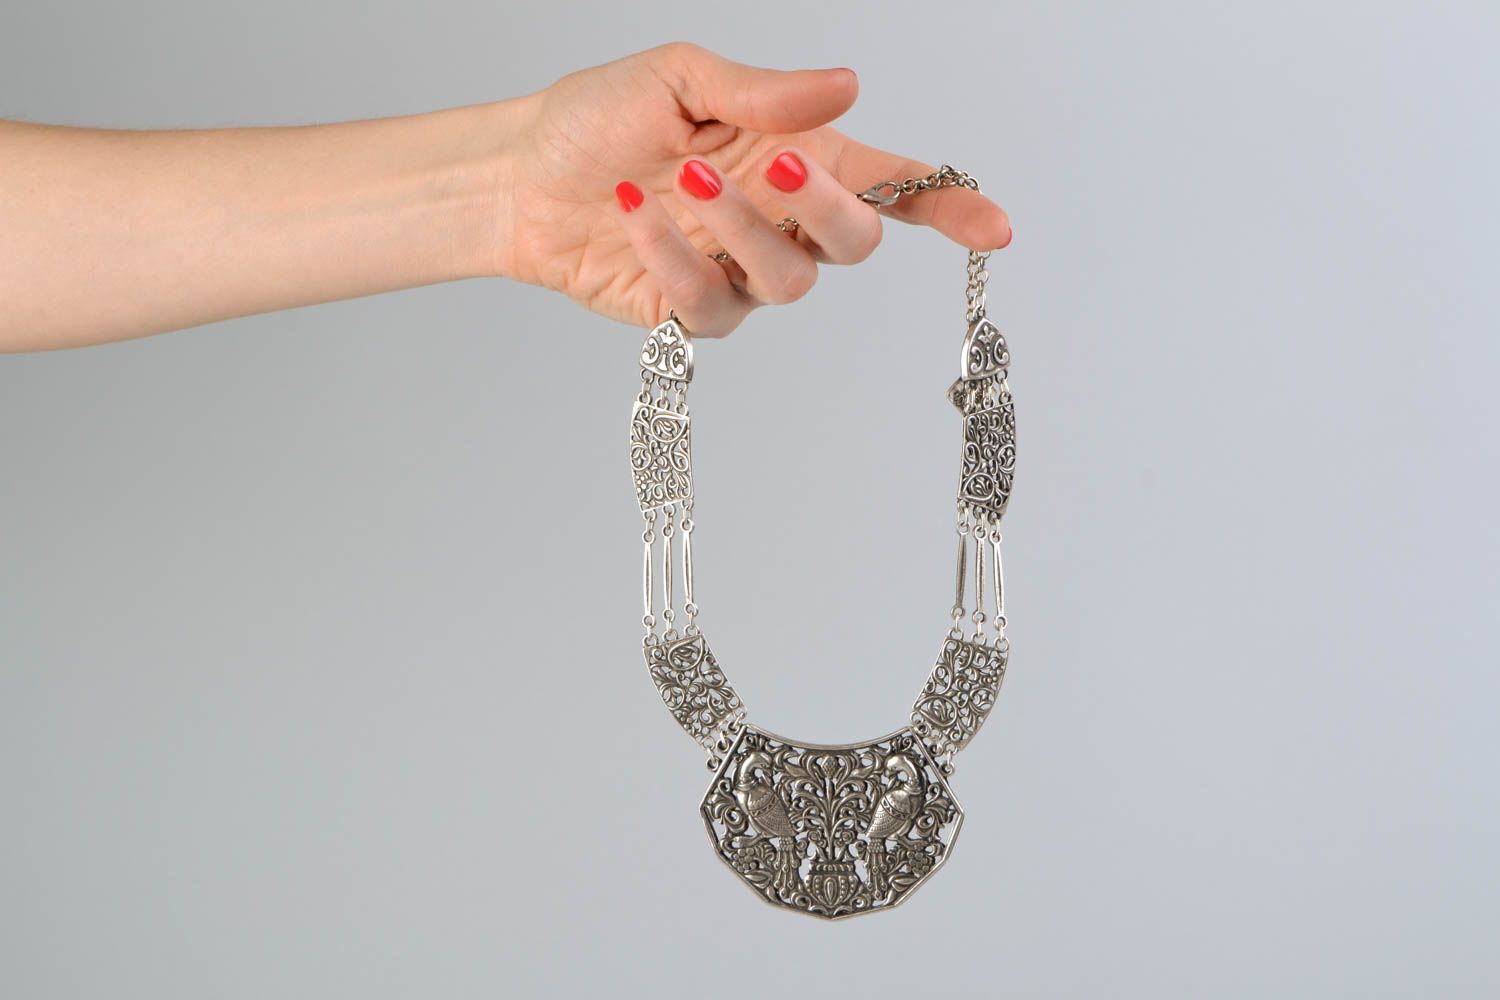 Handmade metal necklace in ethnic style photo 2